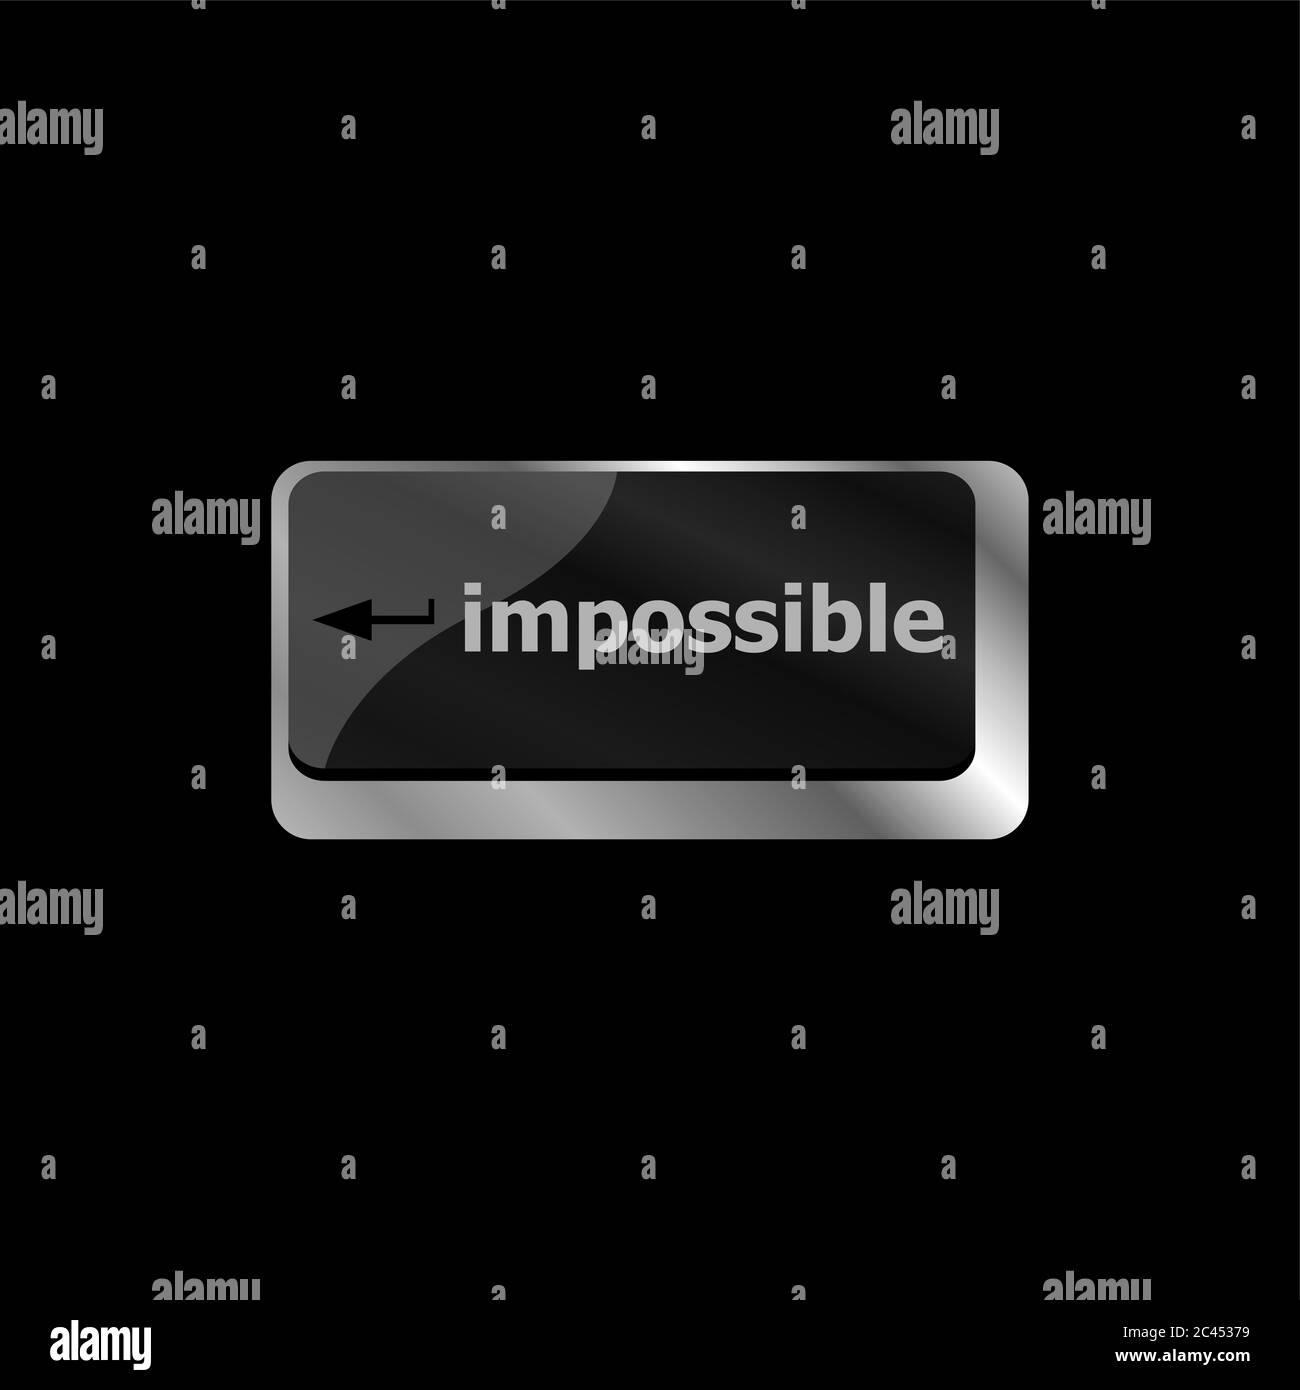 impossible button on laptop keyboard - business concept Stock Photo